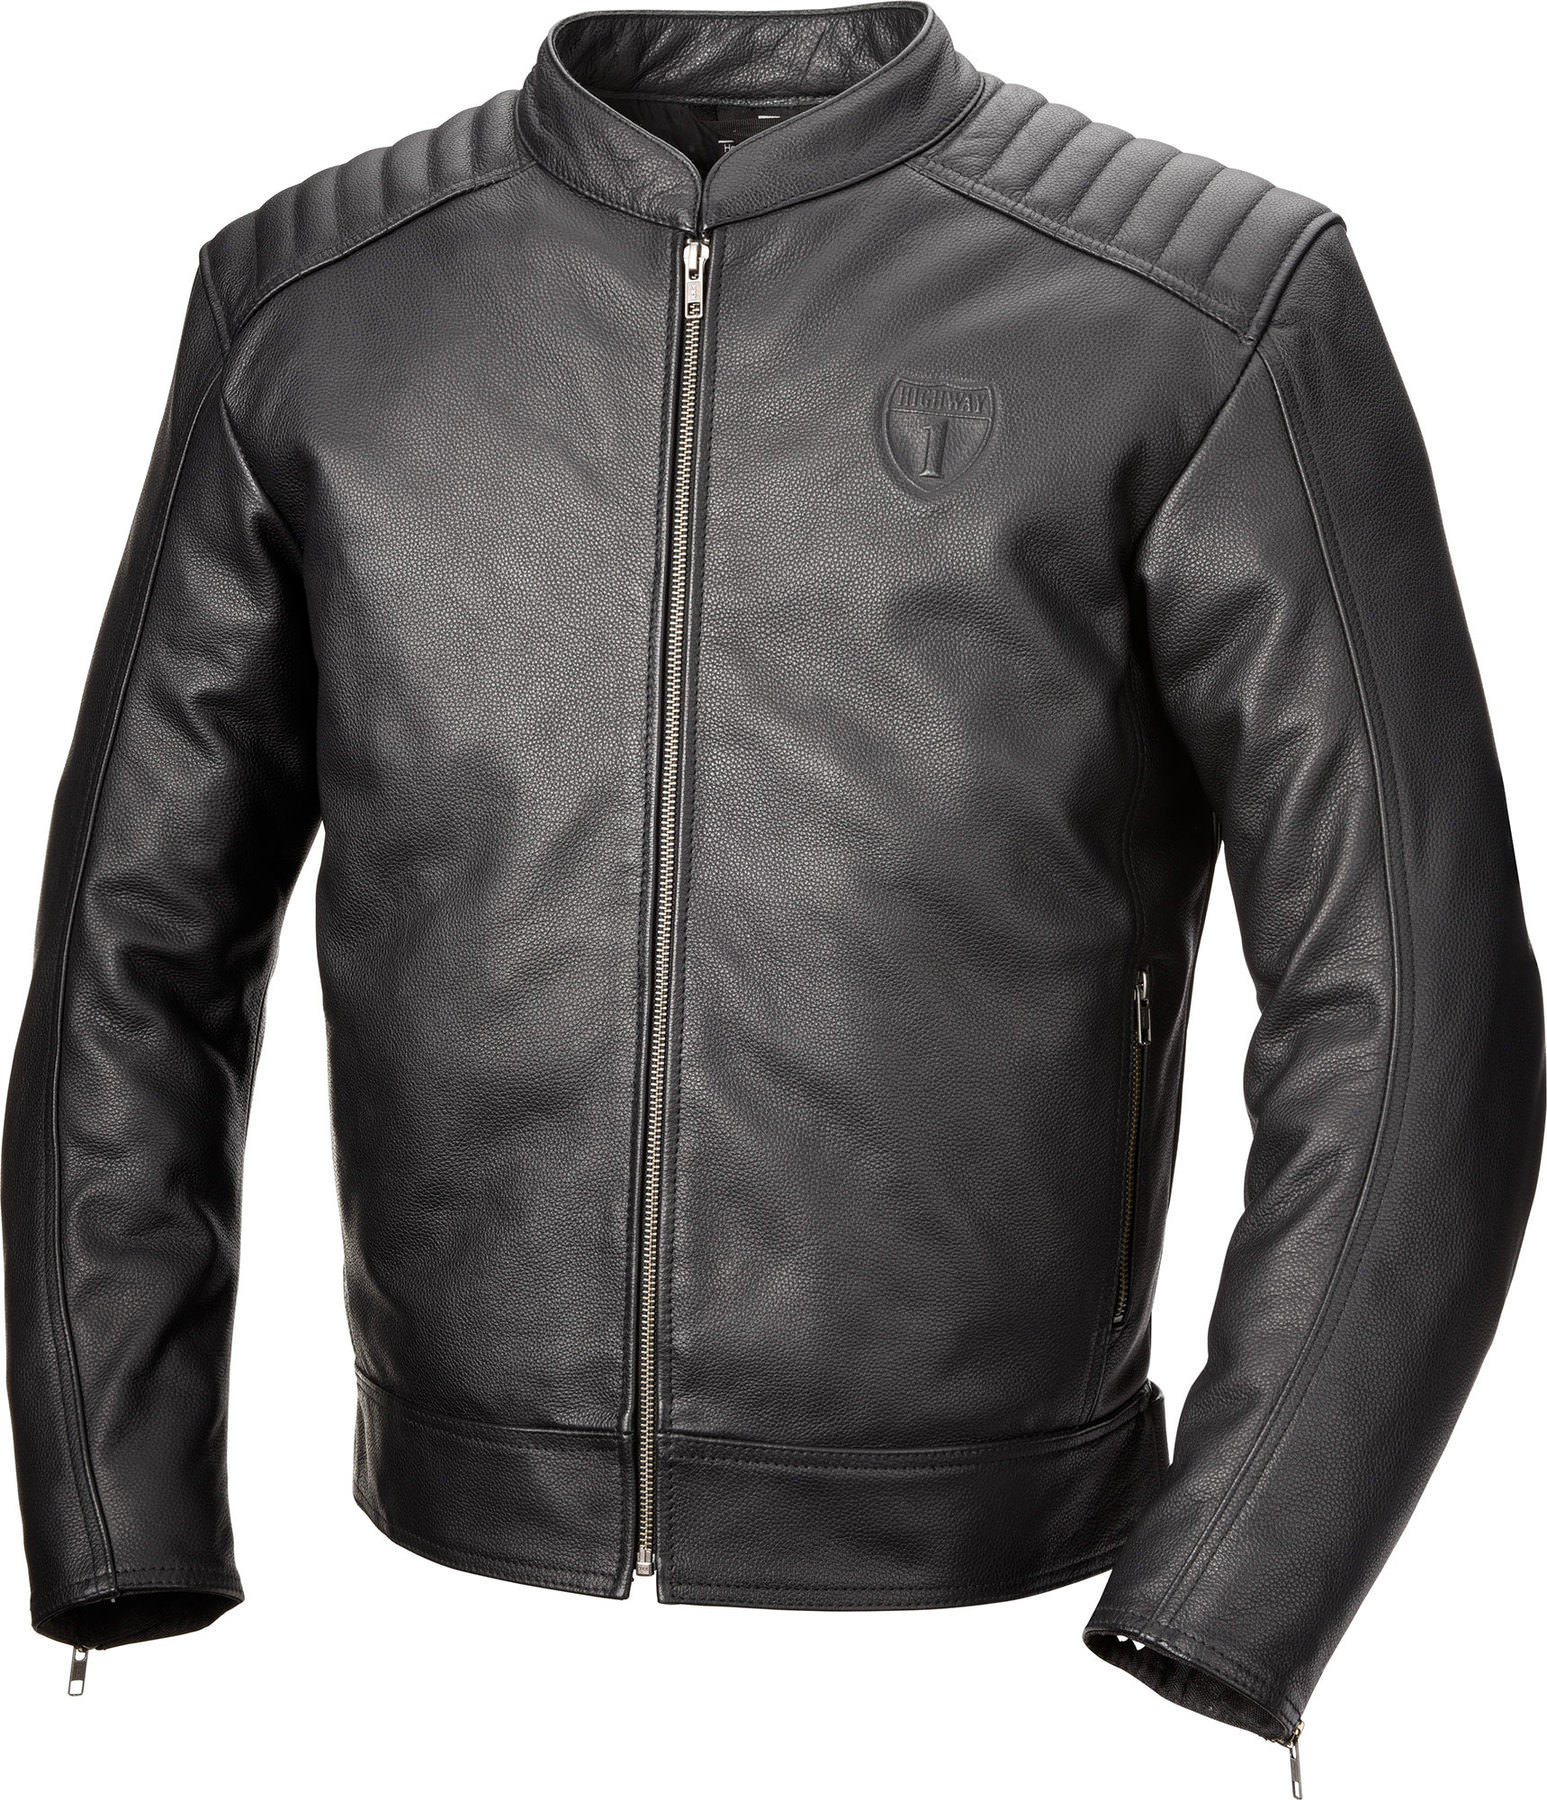 Buy Highway 1 Leather Jacket | Louis motorcycle clothing and technology